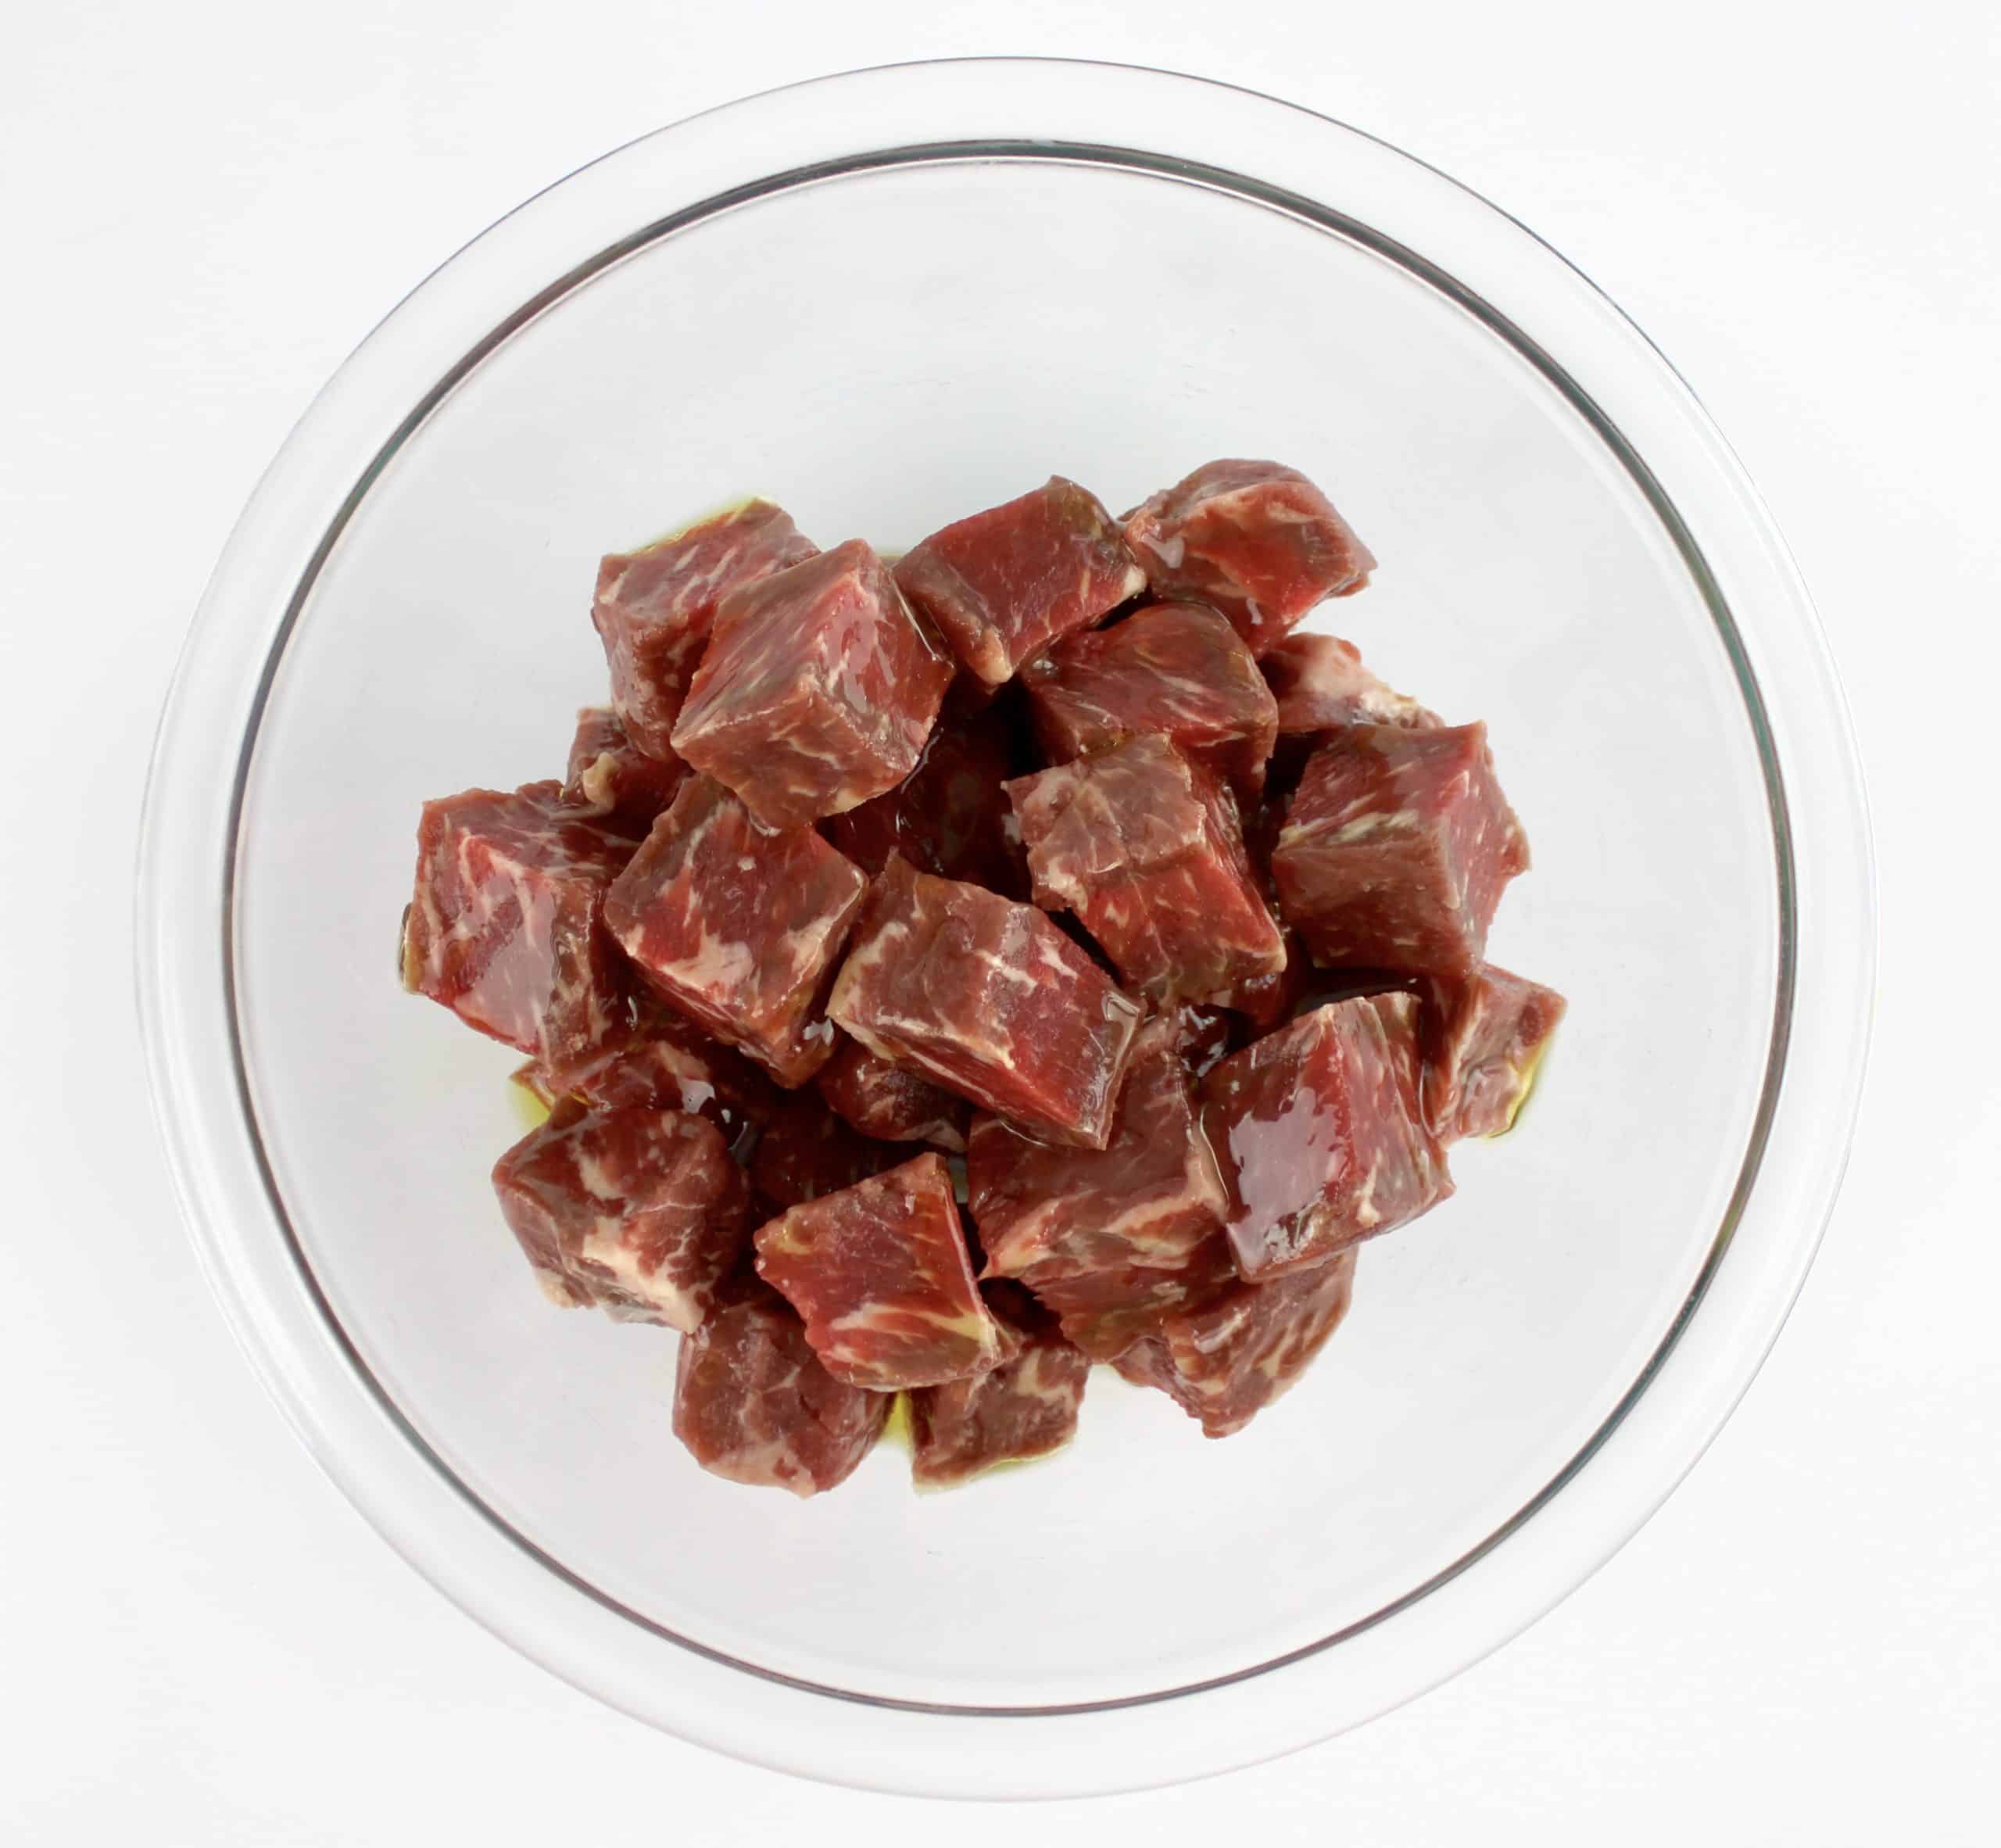 steak bites in glass bowl with olive oil on top